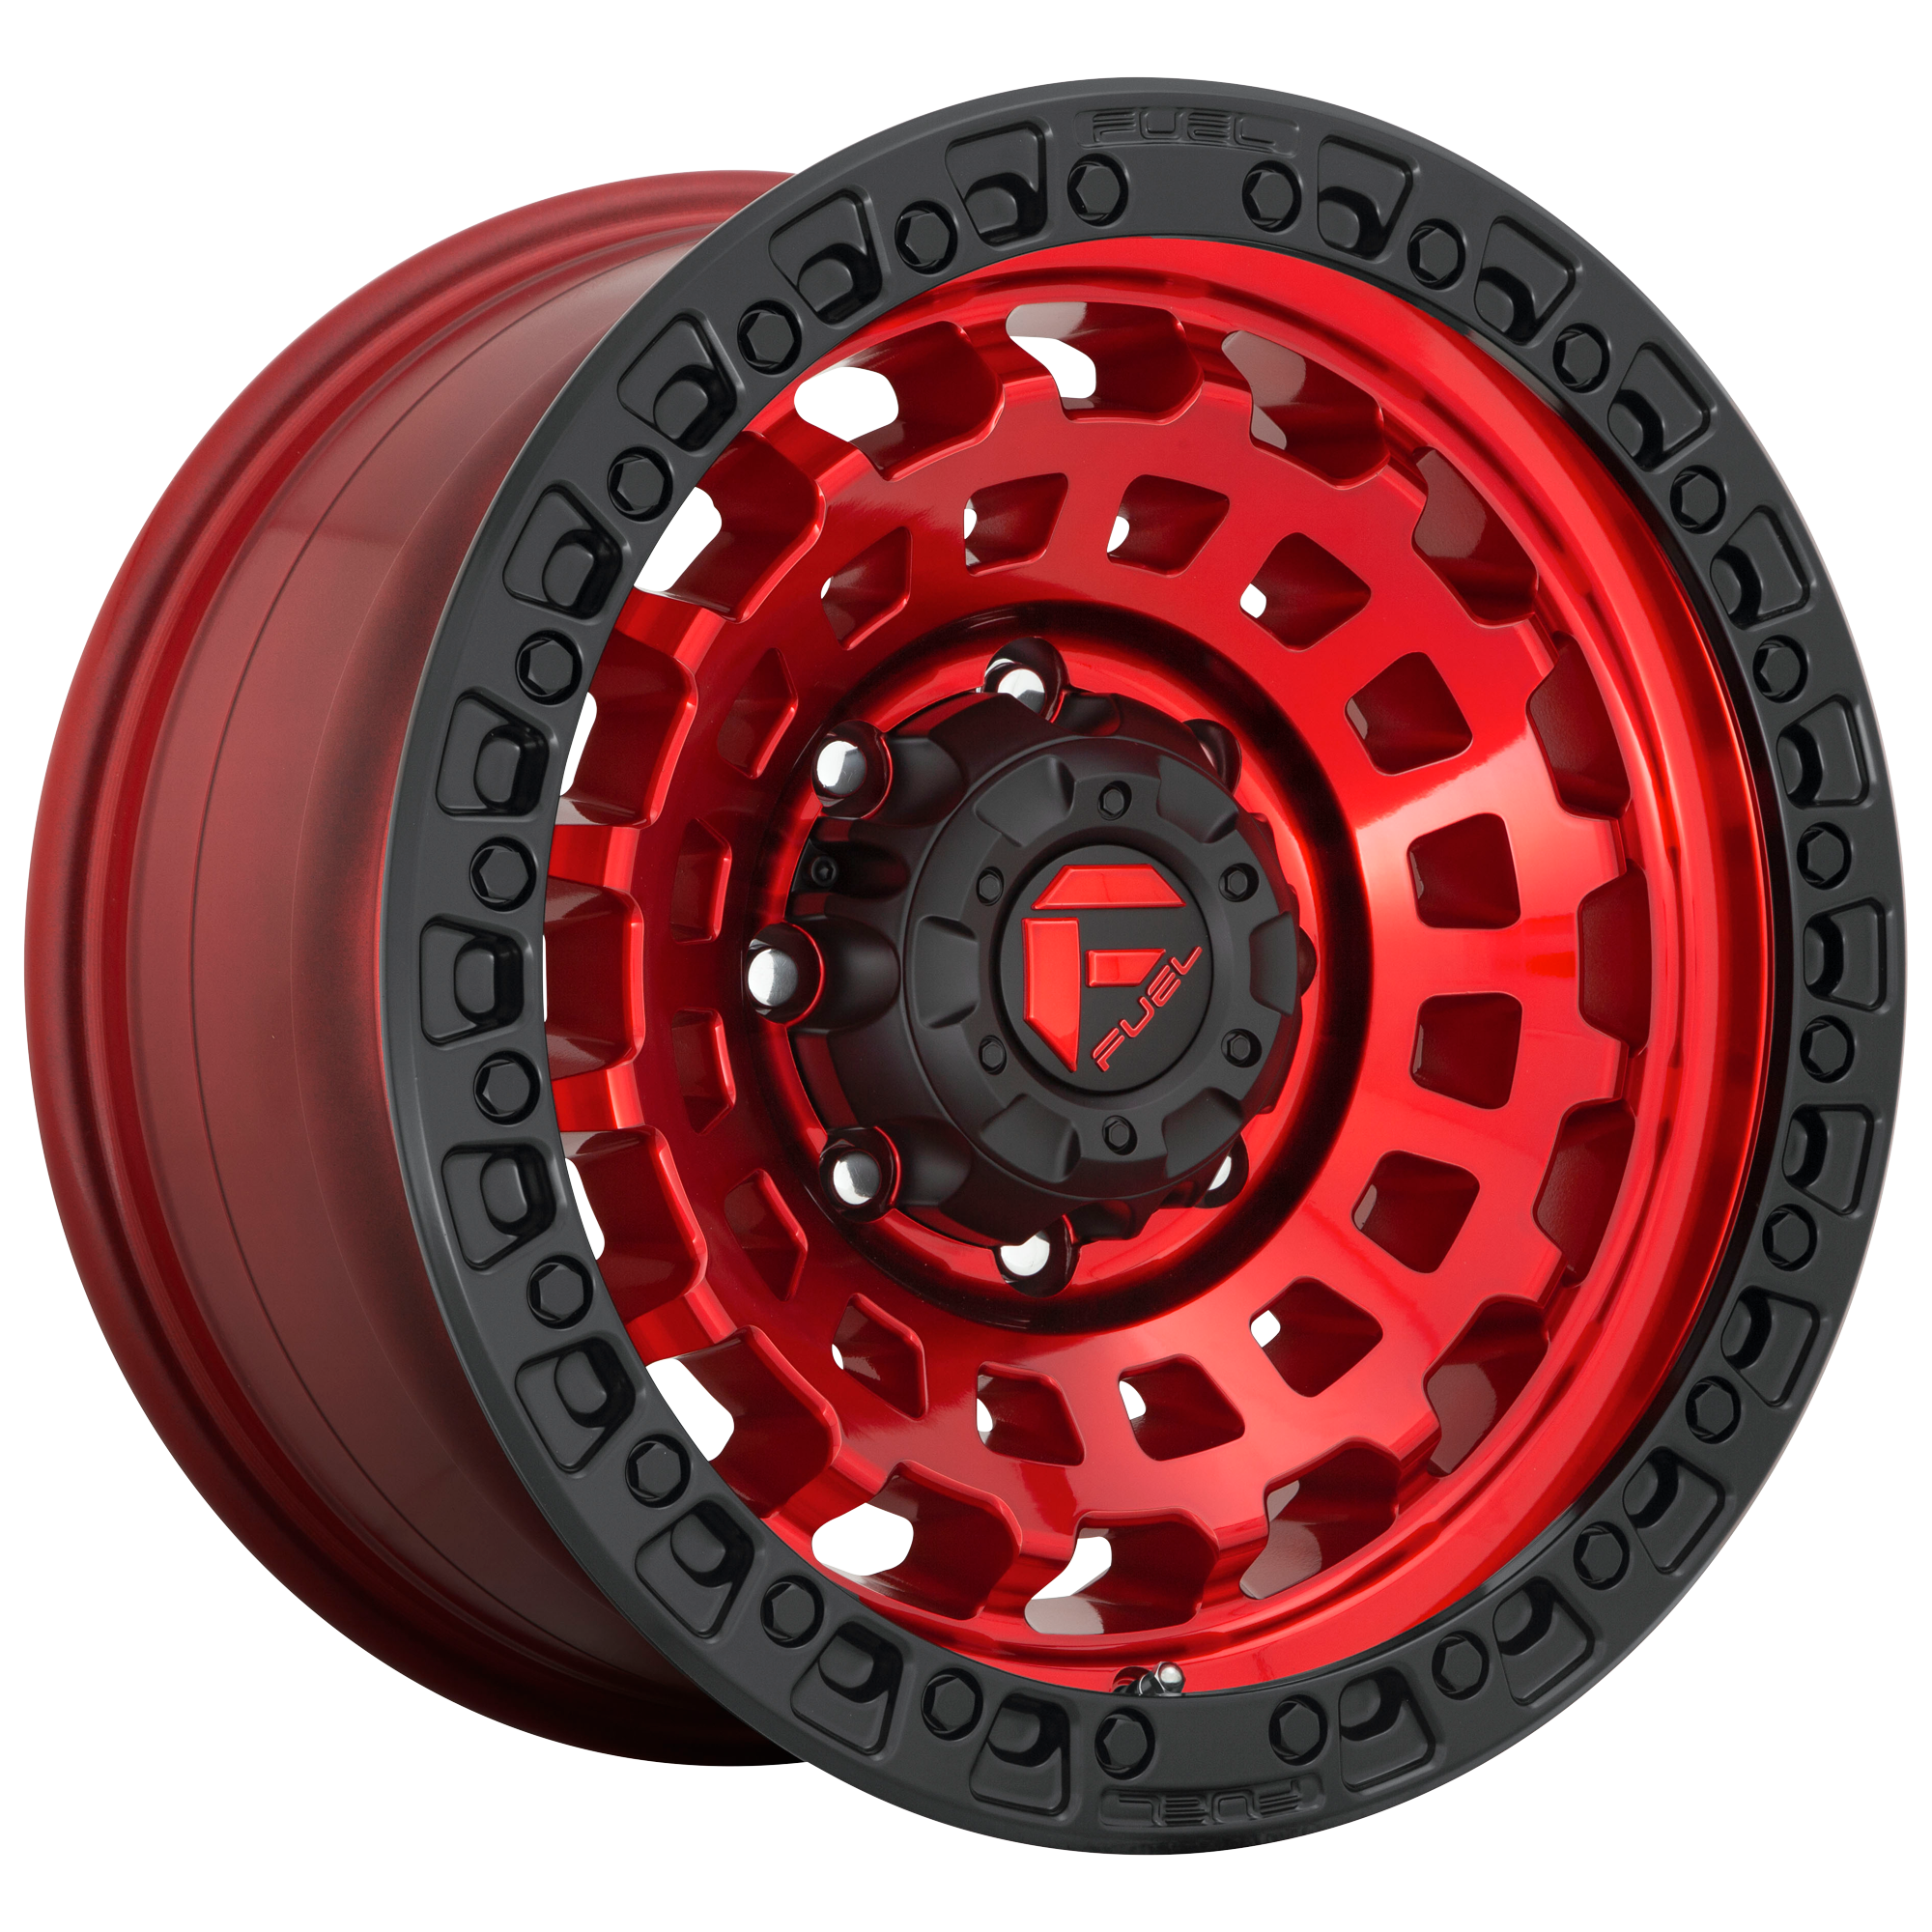 ZEPHYR 17x9 6x135.00 CANDY RED BLACK BEAD RING (1 mm) - Tires and Engine Performance